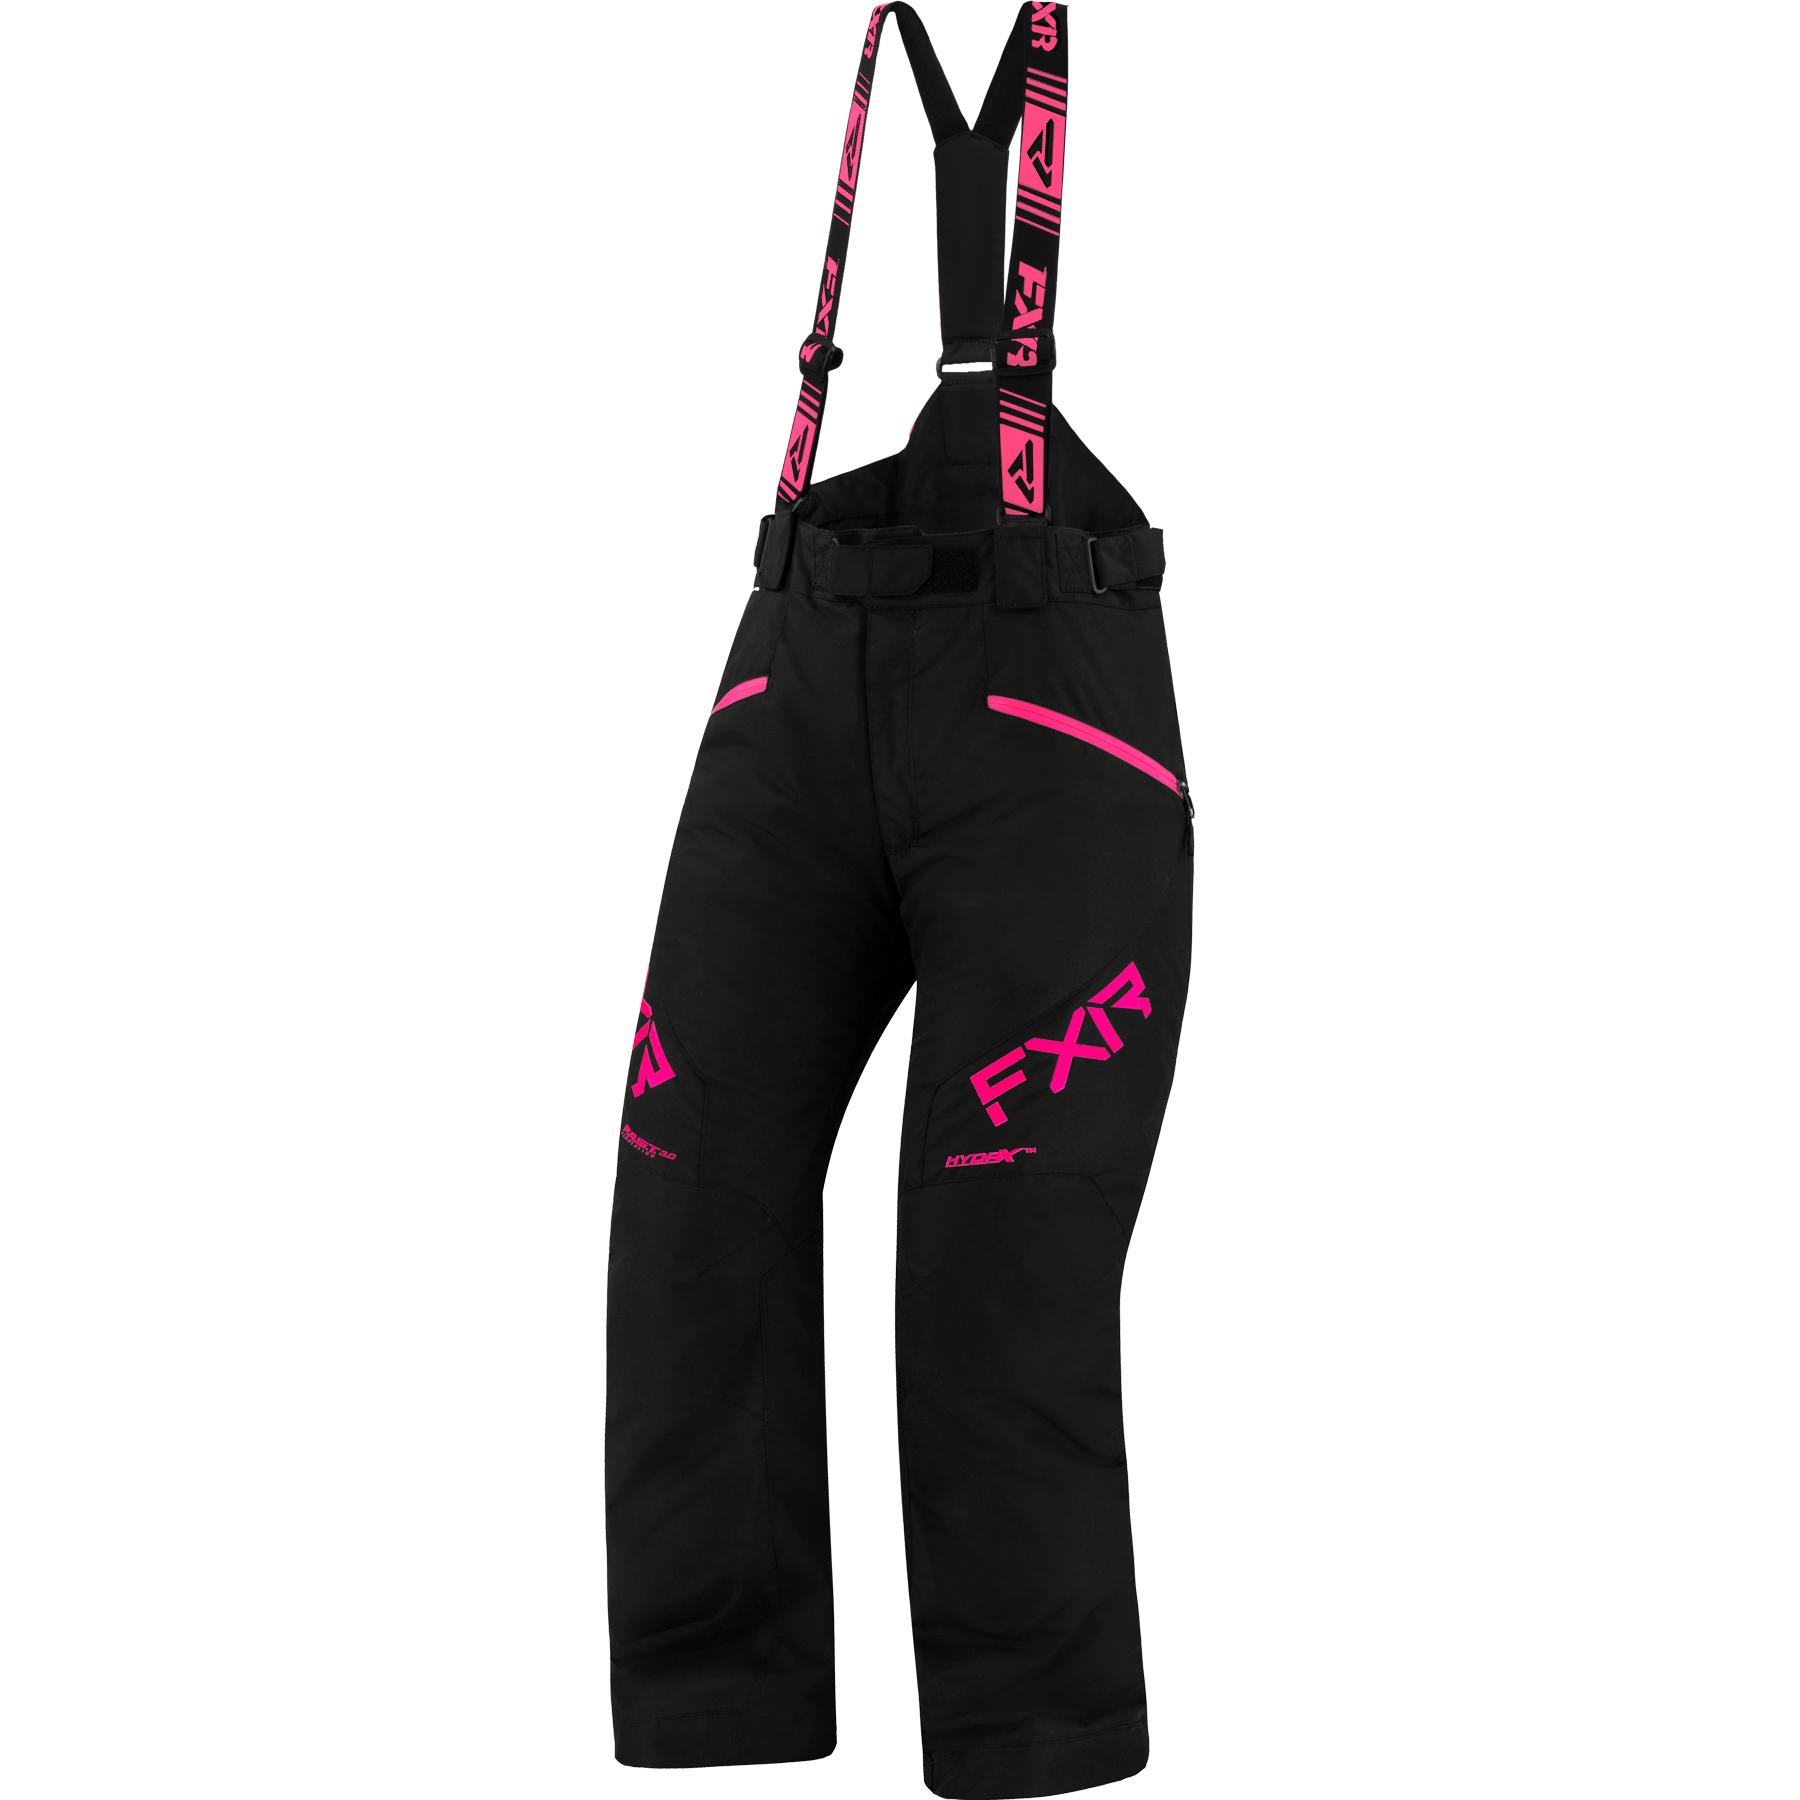 fxr racing insulated pants for womens fresh fast